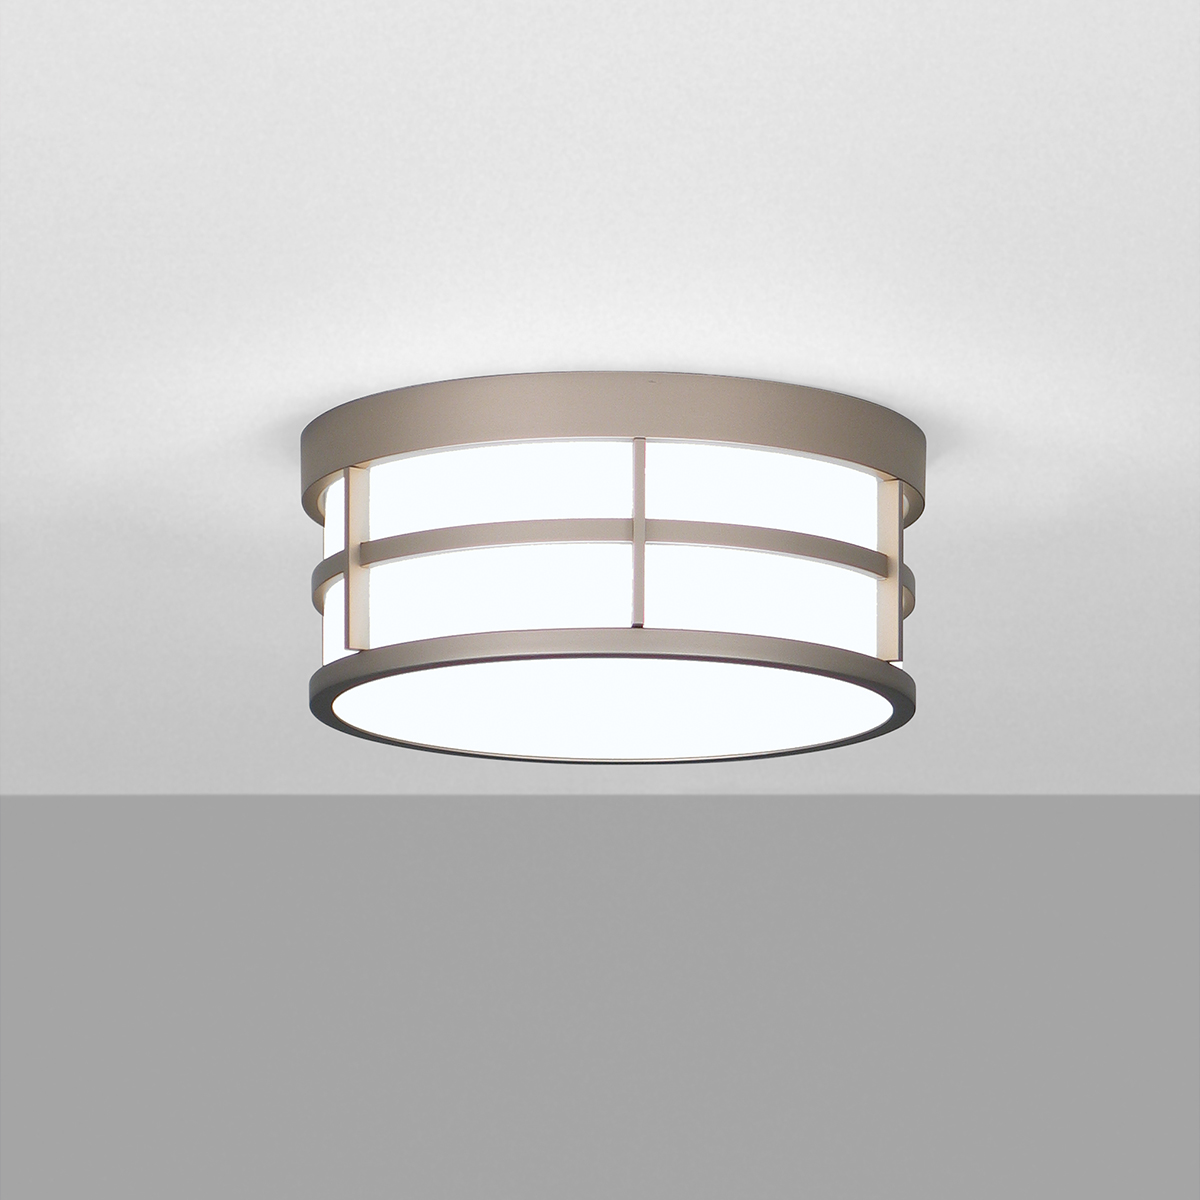 A ceiling mounted drum luminaire with cross bar accents 